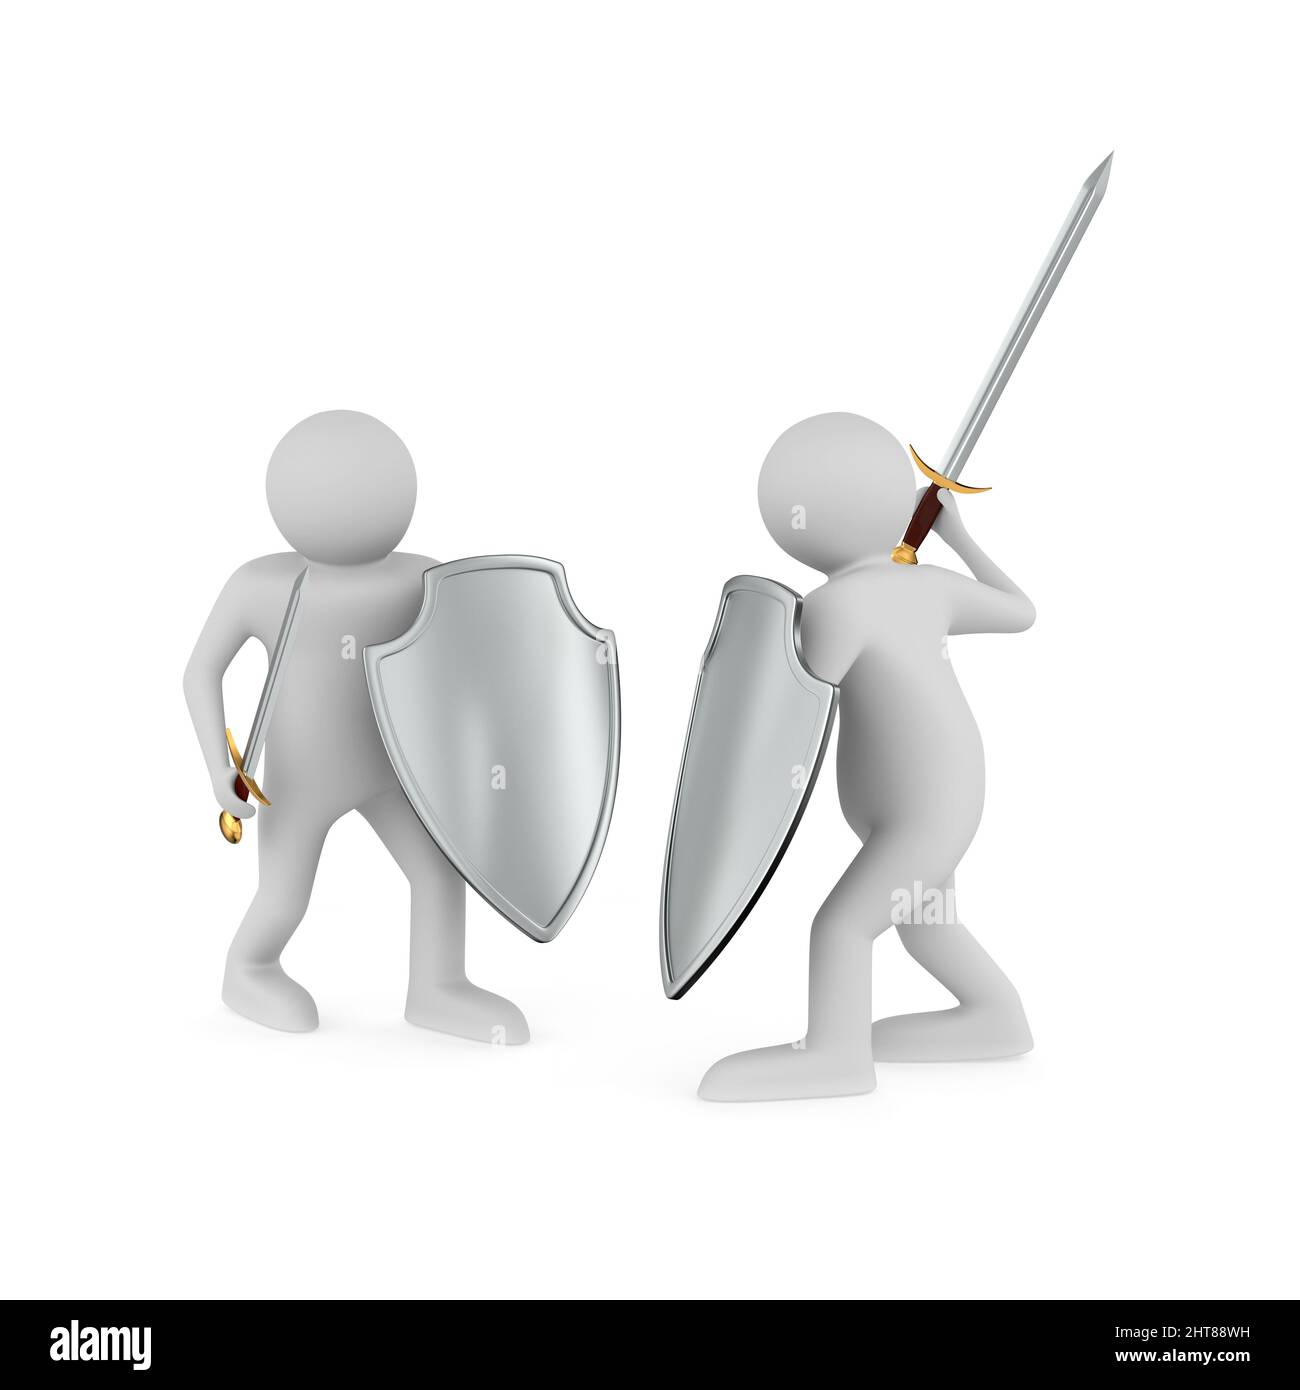 Two knights with sword and shield on white background. Isolated 3D illustration Stock Photo